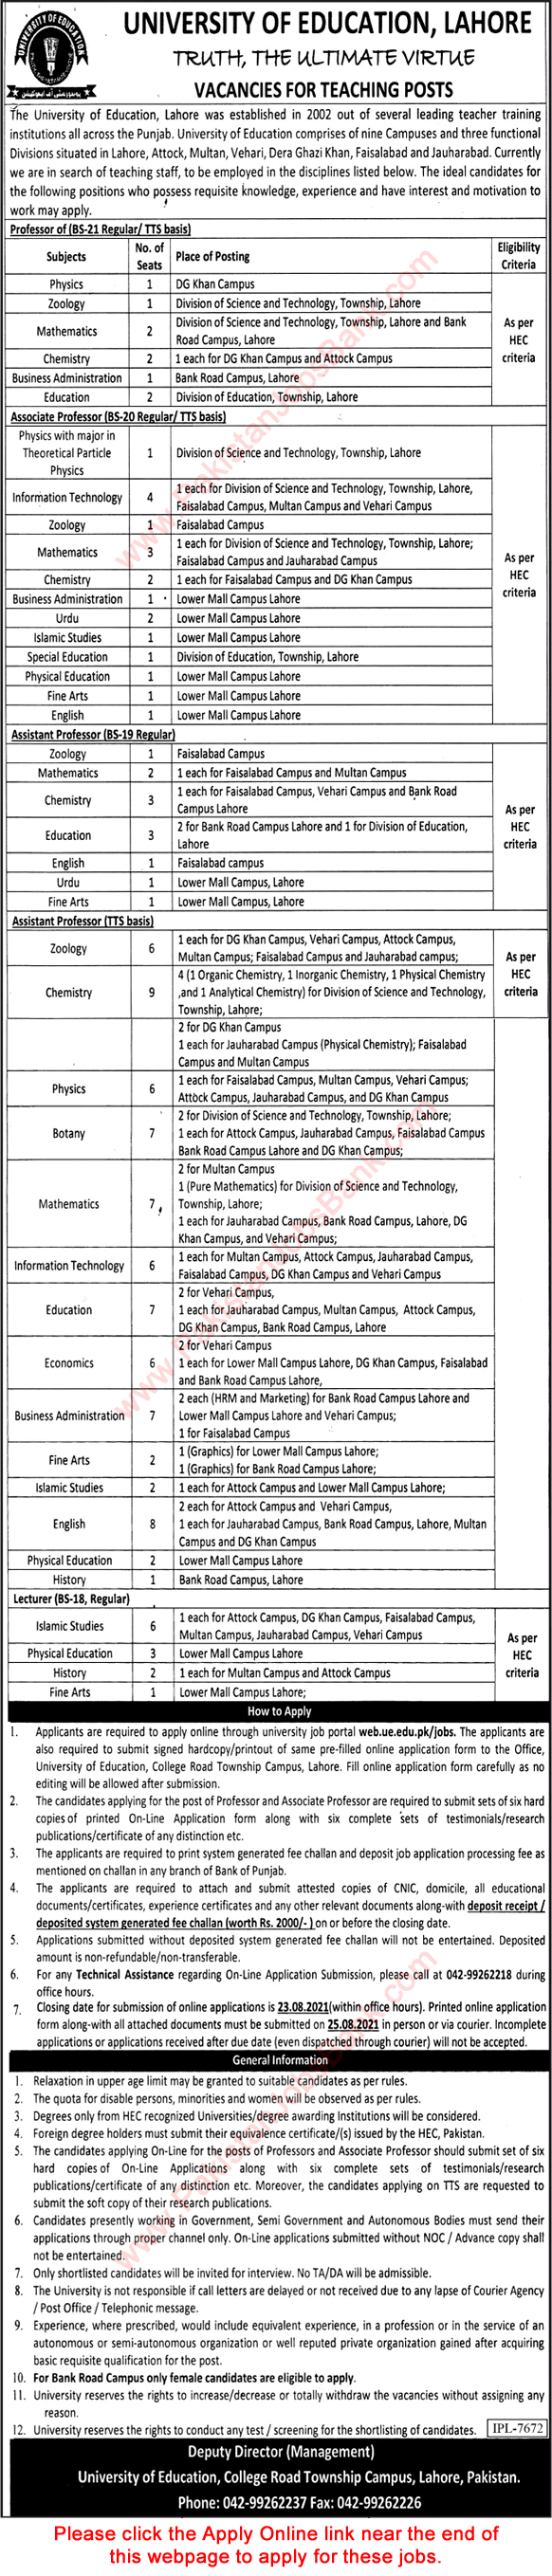 Teaching Faculty Jobs in University of Education 2021 August UOE Apply Online Latest